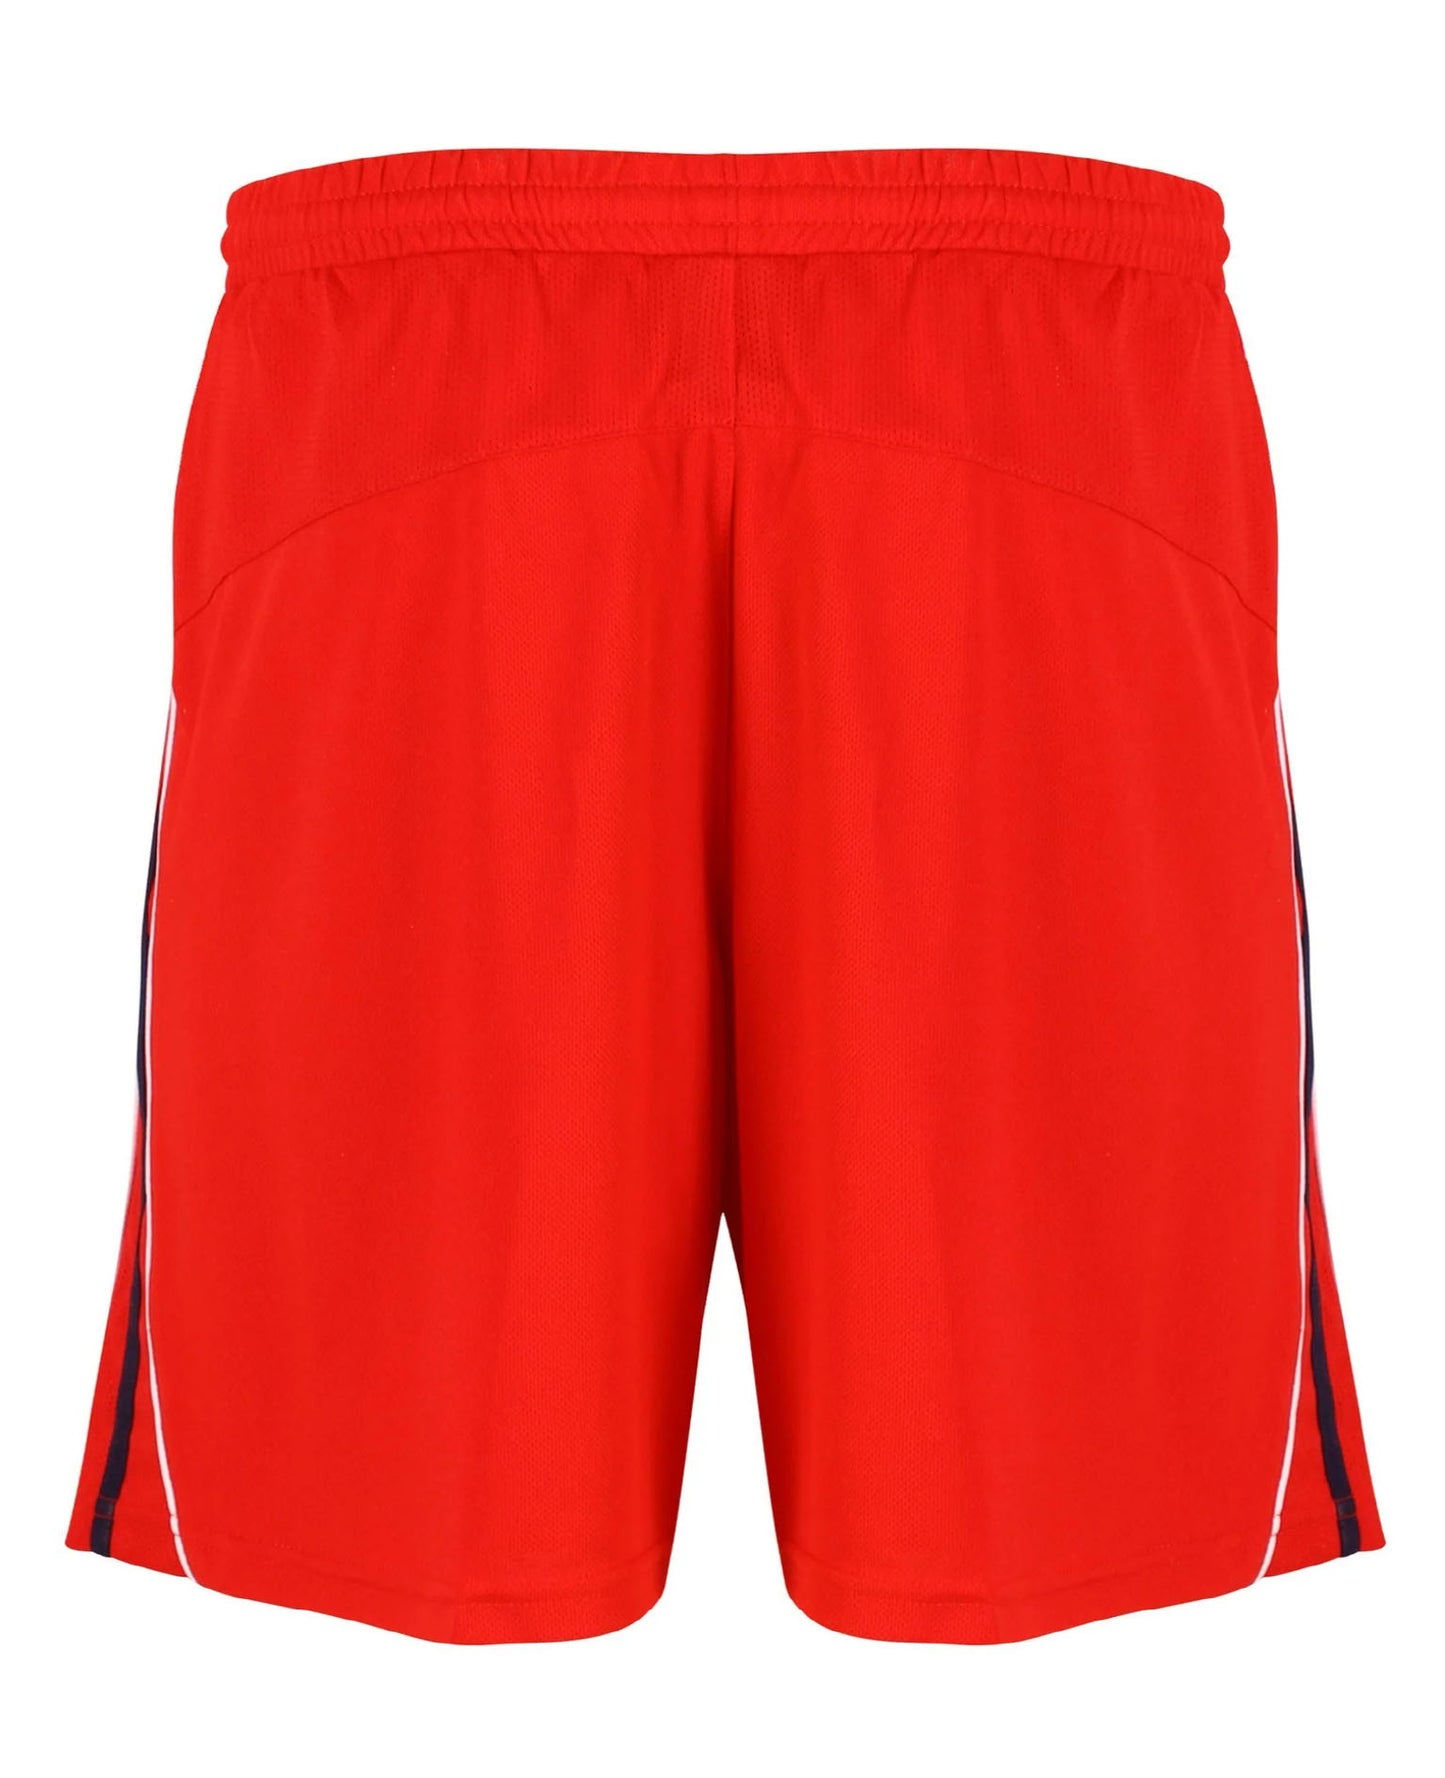 Doodle Mesh Shorts - Red